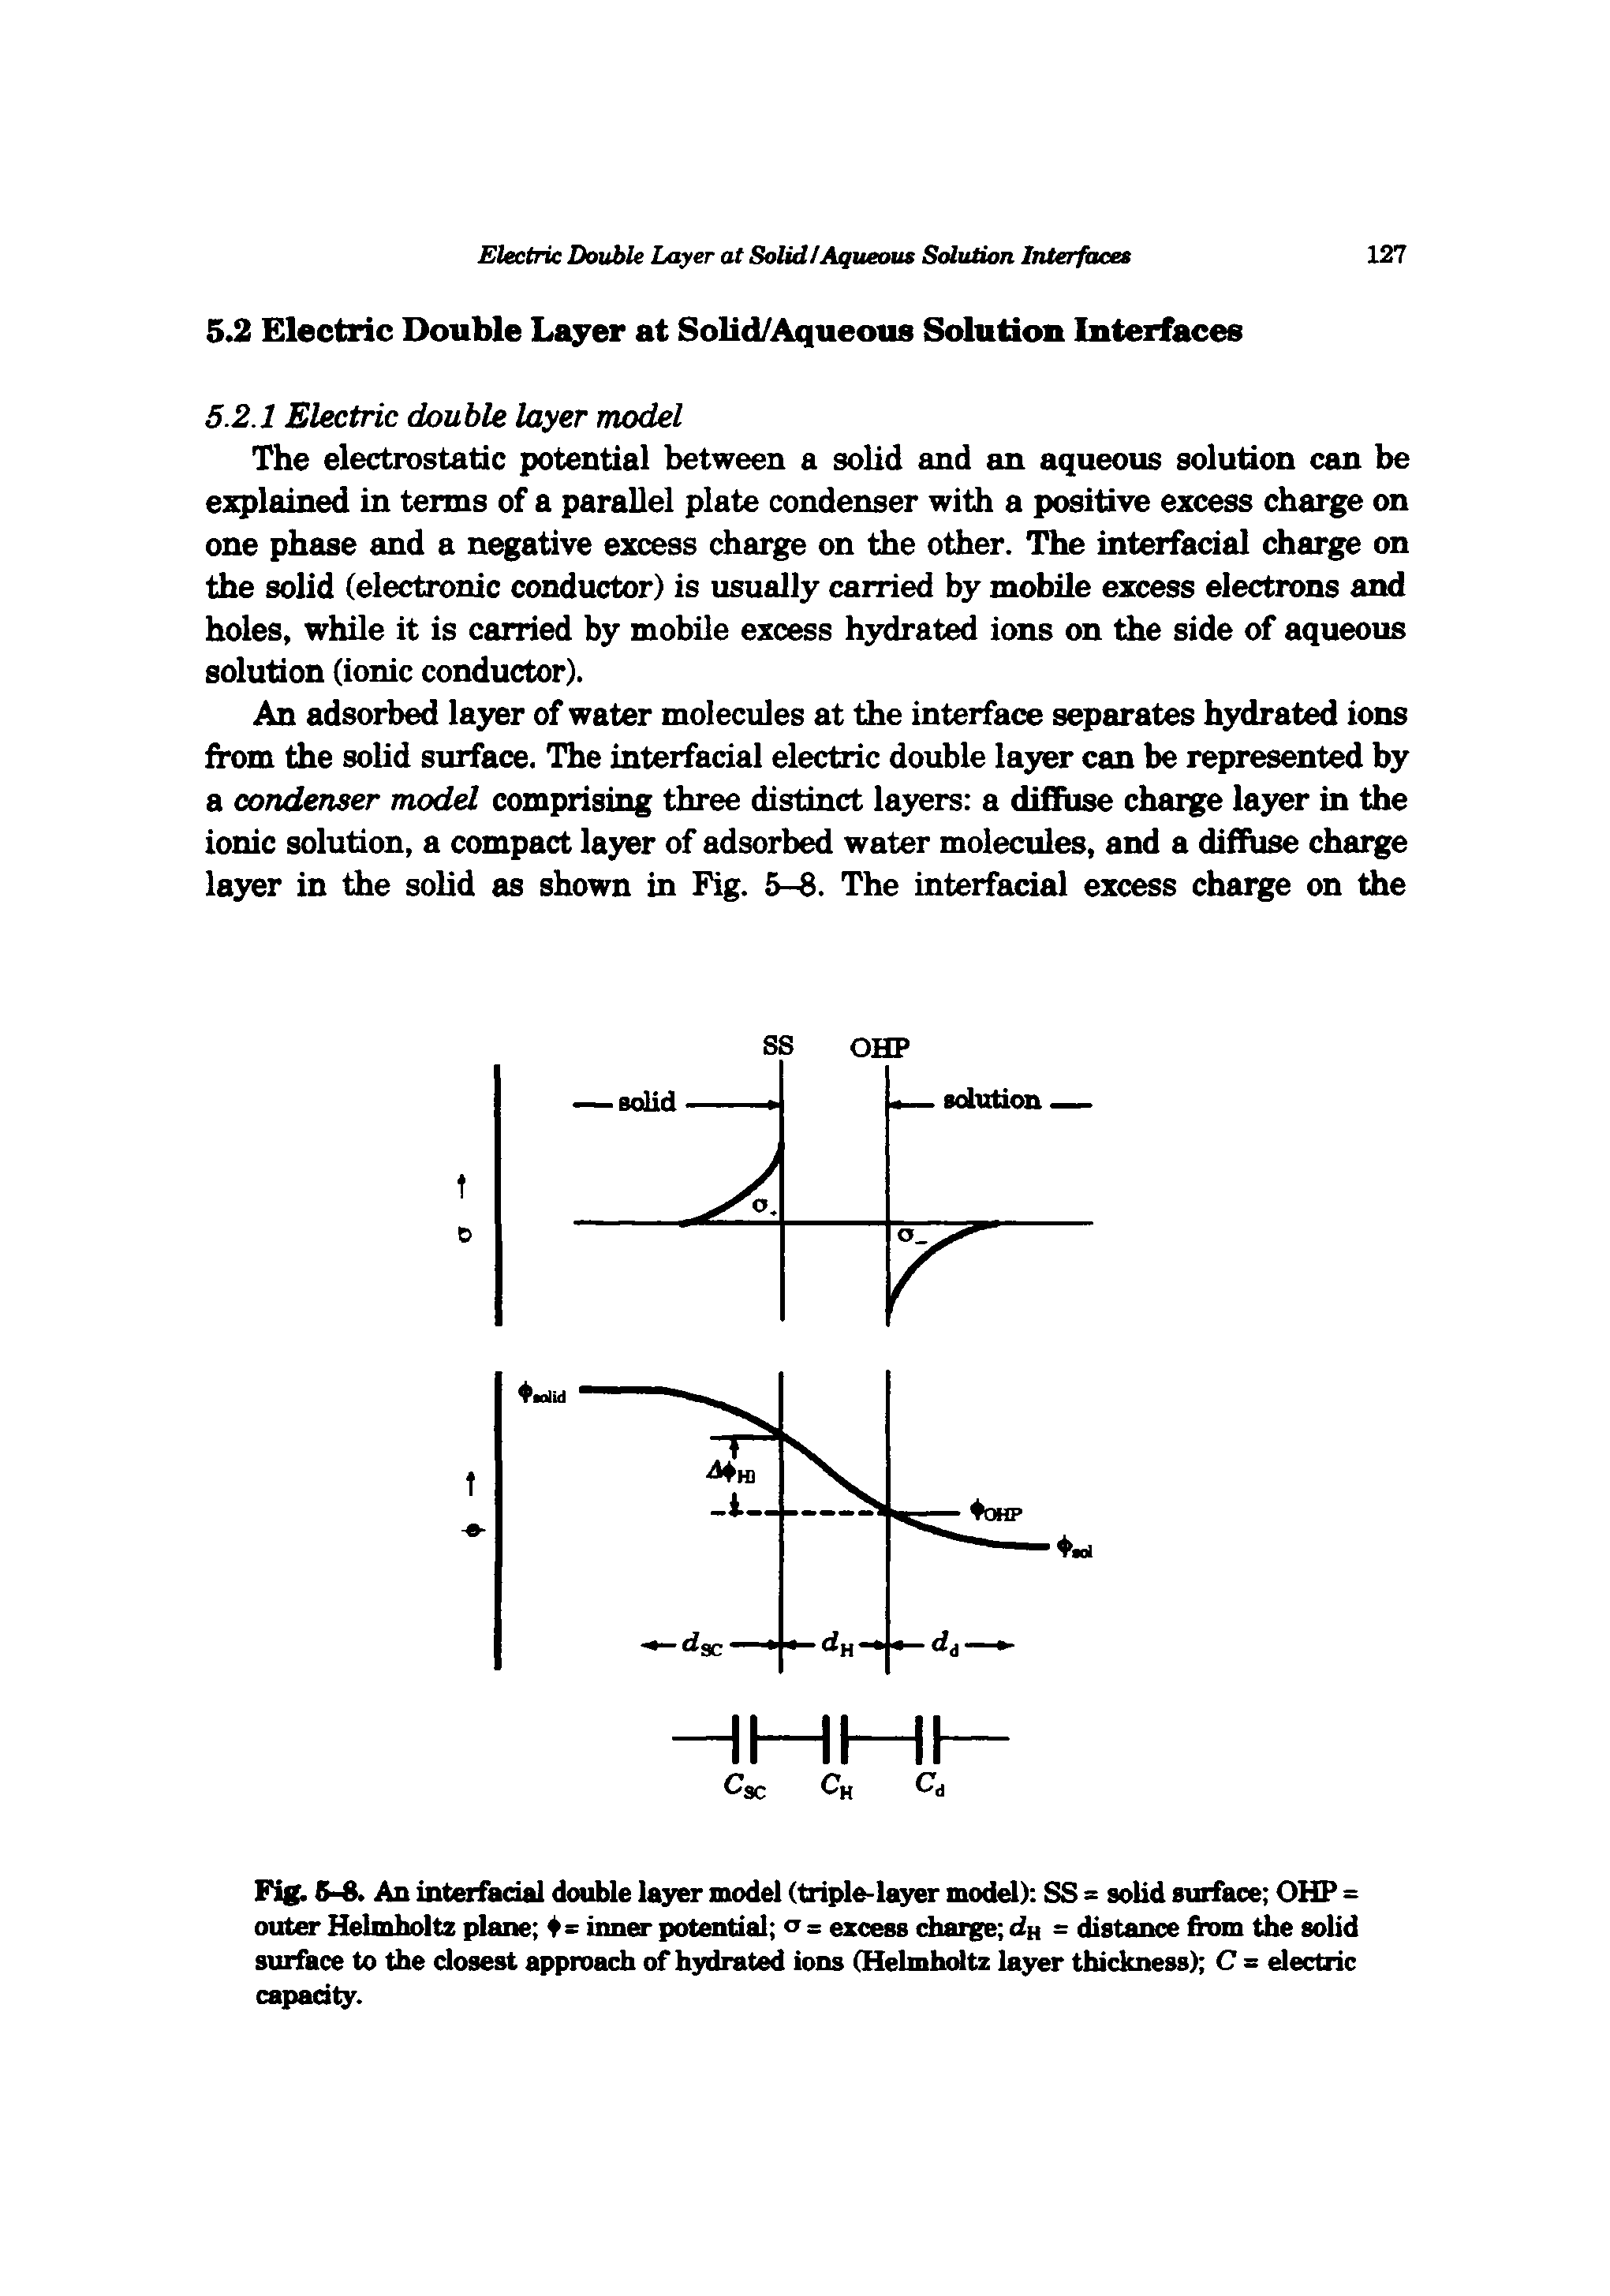 Fig. 5-8. An interfadal double layer model (triple-layer model) SS = solid surface OHP = outer Helmholtz plane inner potential tt z excess charge <2h = distance from the solid surface to the closest approach of hydrated ions (Helmluritz layer thickness) C = electric capacity.